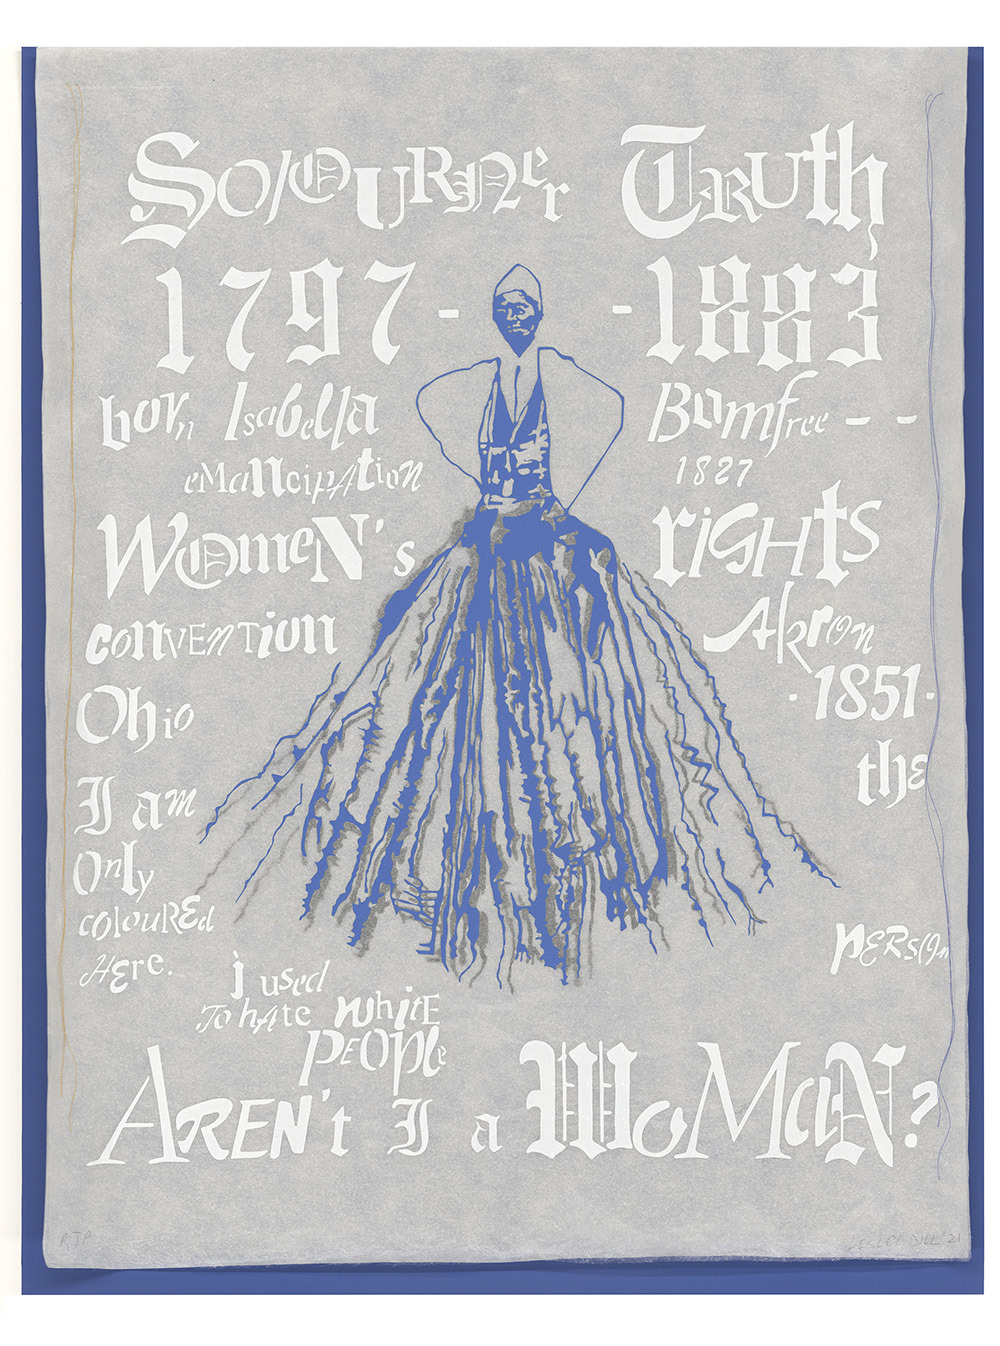 A blue sketch of Sojourner Truth in a large dress featuring text that says "Aren’t I a Woman?" and other quotes and facts